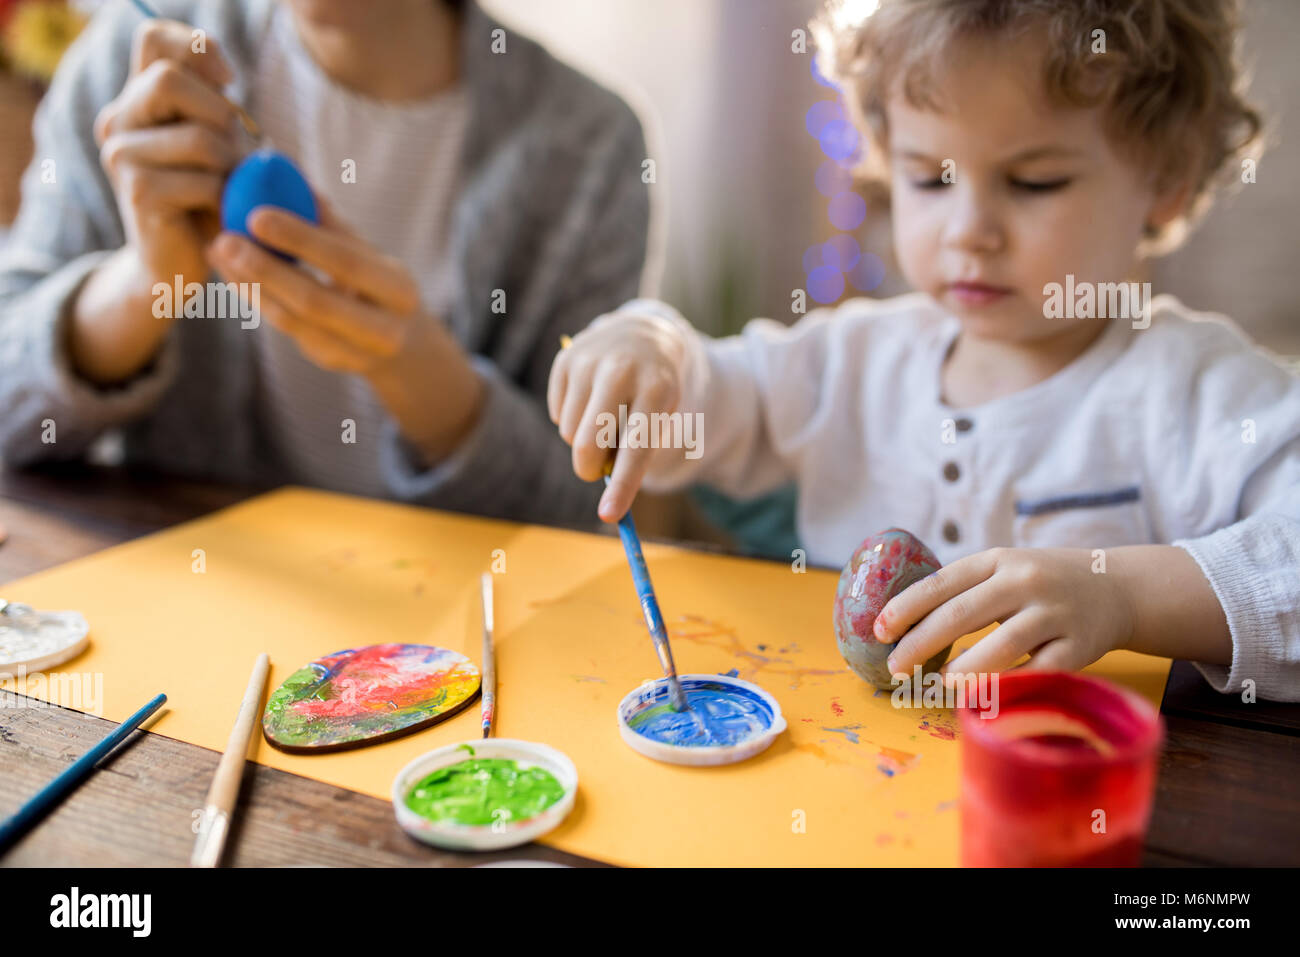 Cute Toddler Painting Easter Eggs with Mom Stock Photo